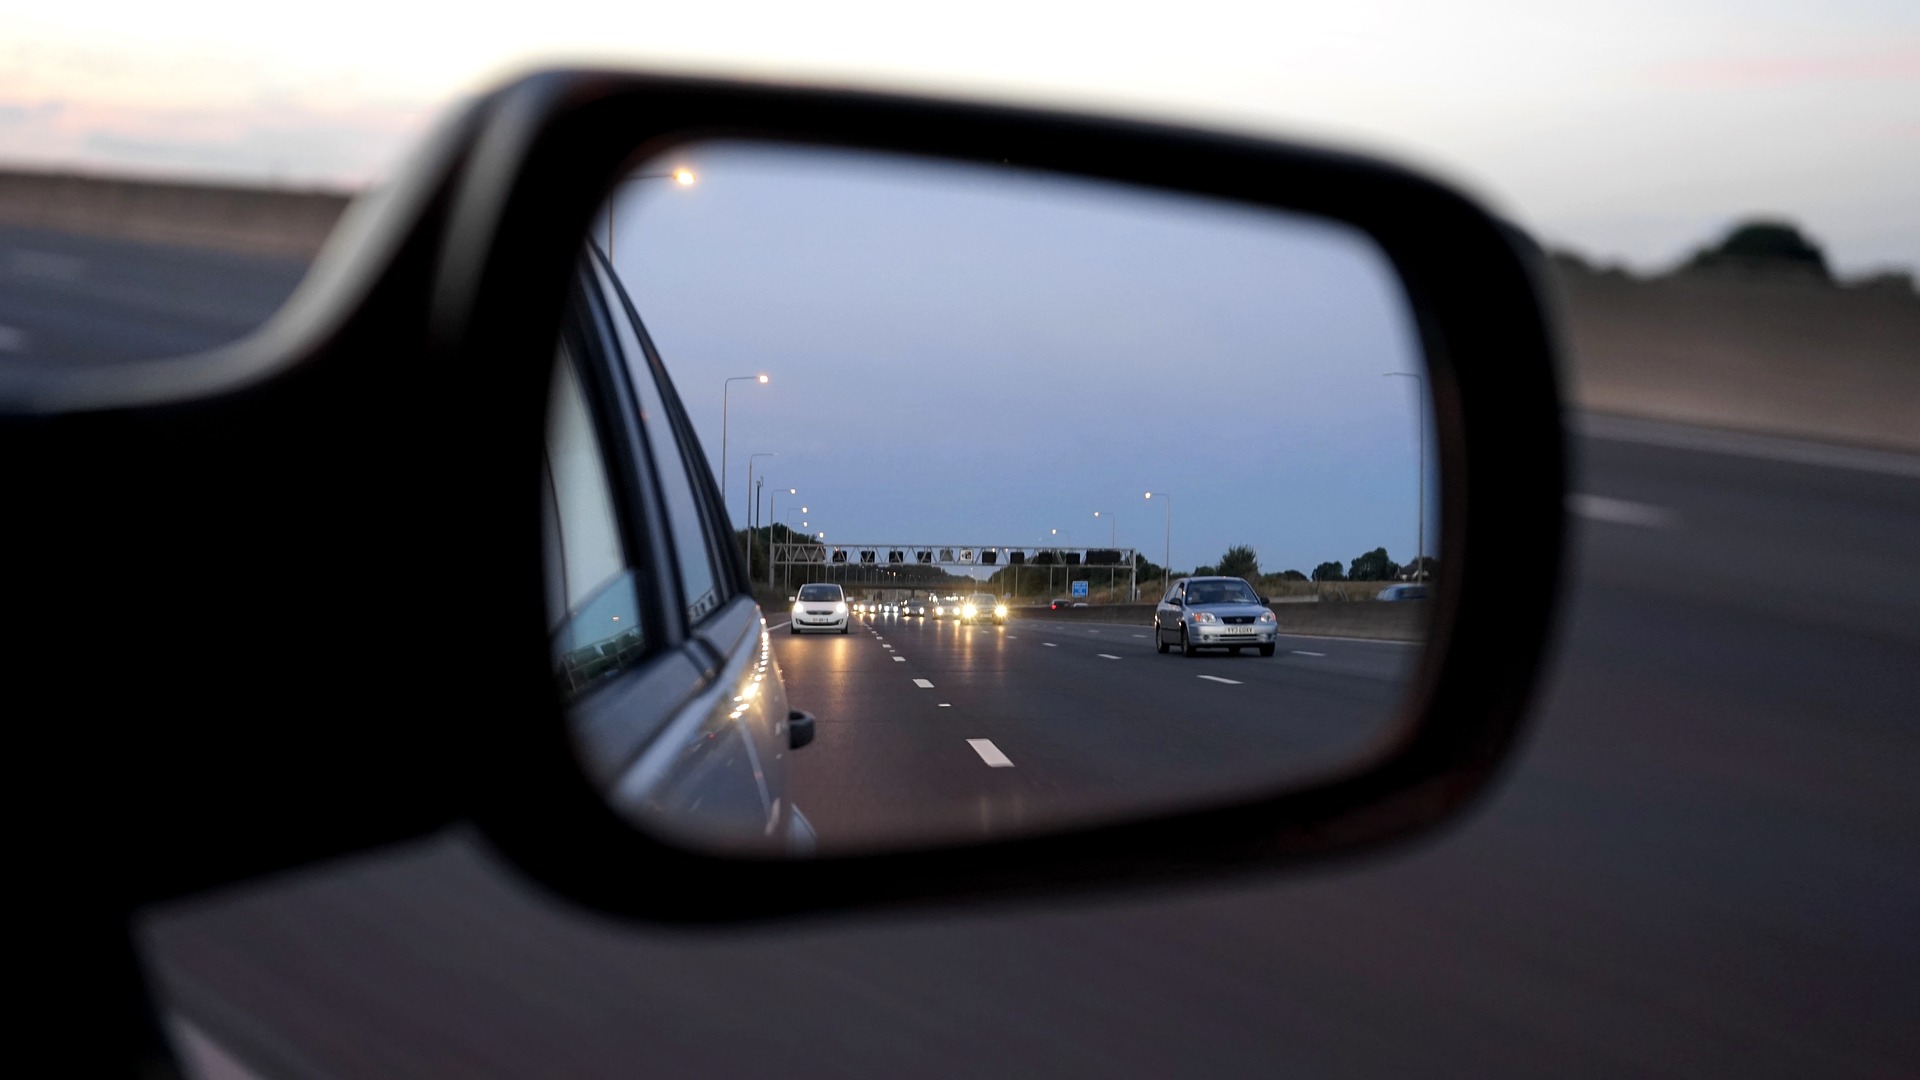 Look in your mirrors while driving, so you will always be aware of the others sharing the road with you. 